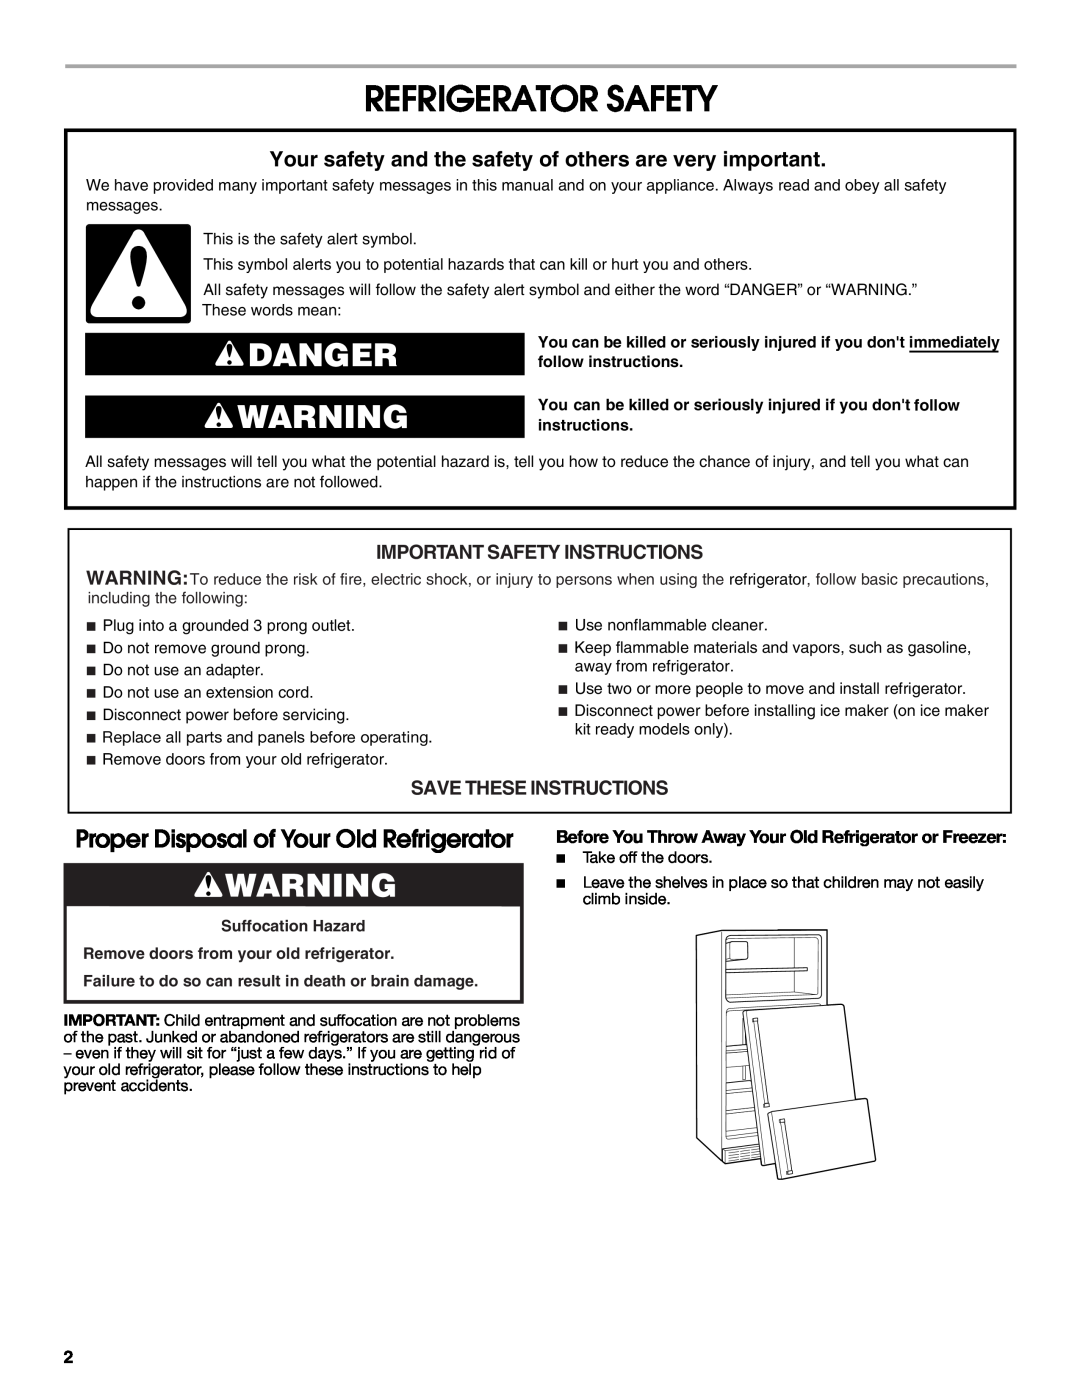 Whirlpool RT14BKXSQ00 Refrigerator Safety, Danger, Proper Disposal of Your Old Refrigerator, Important Safety Instructions 